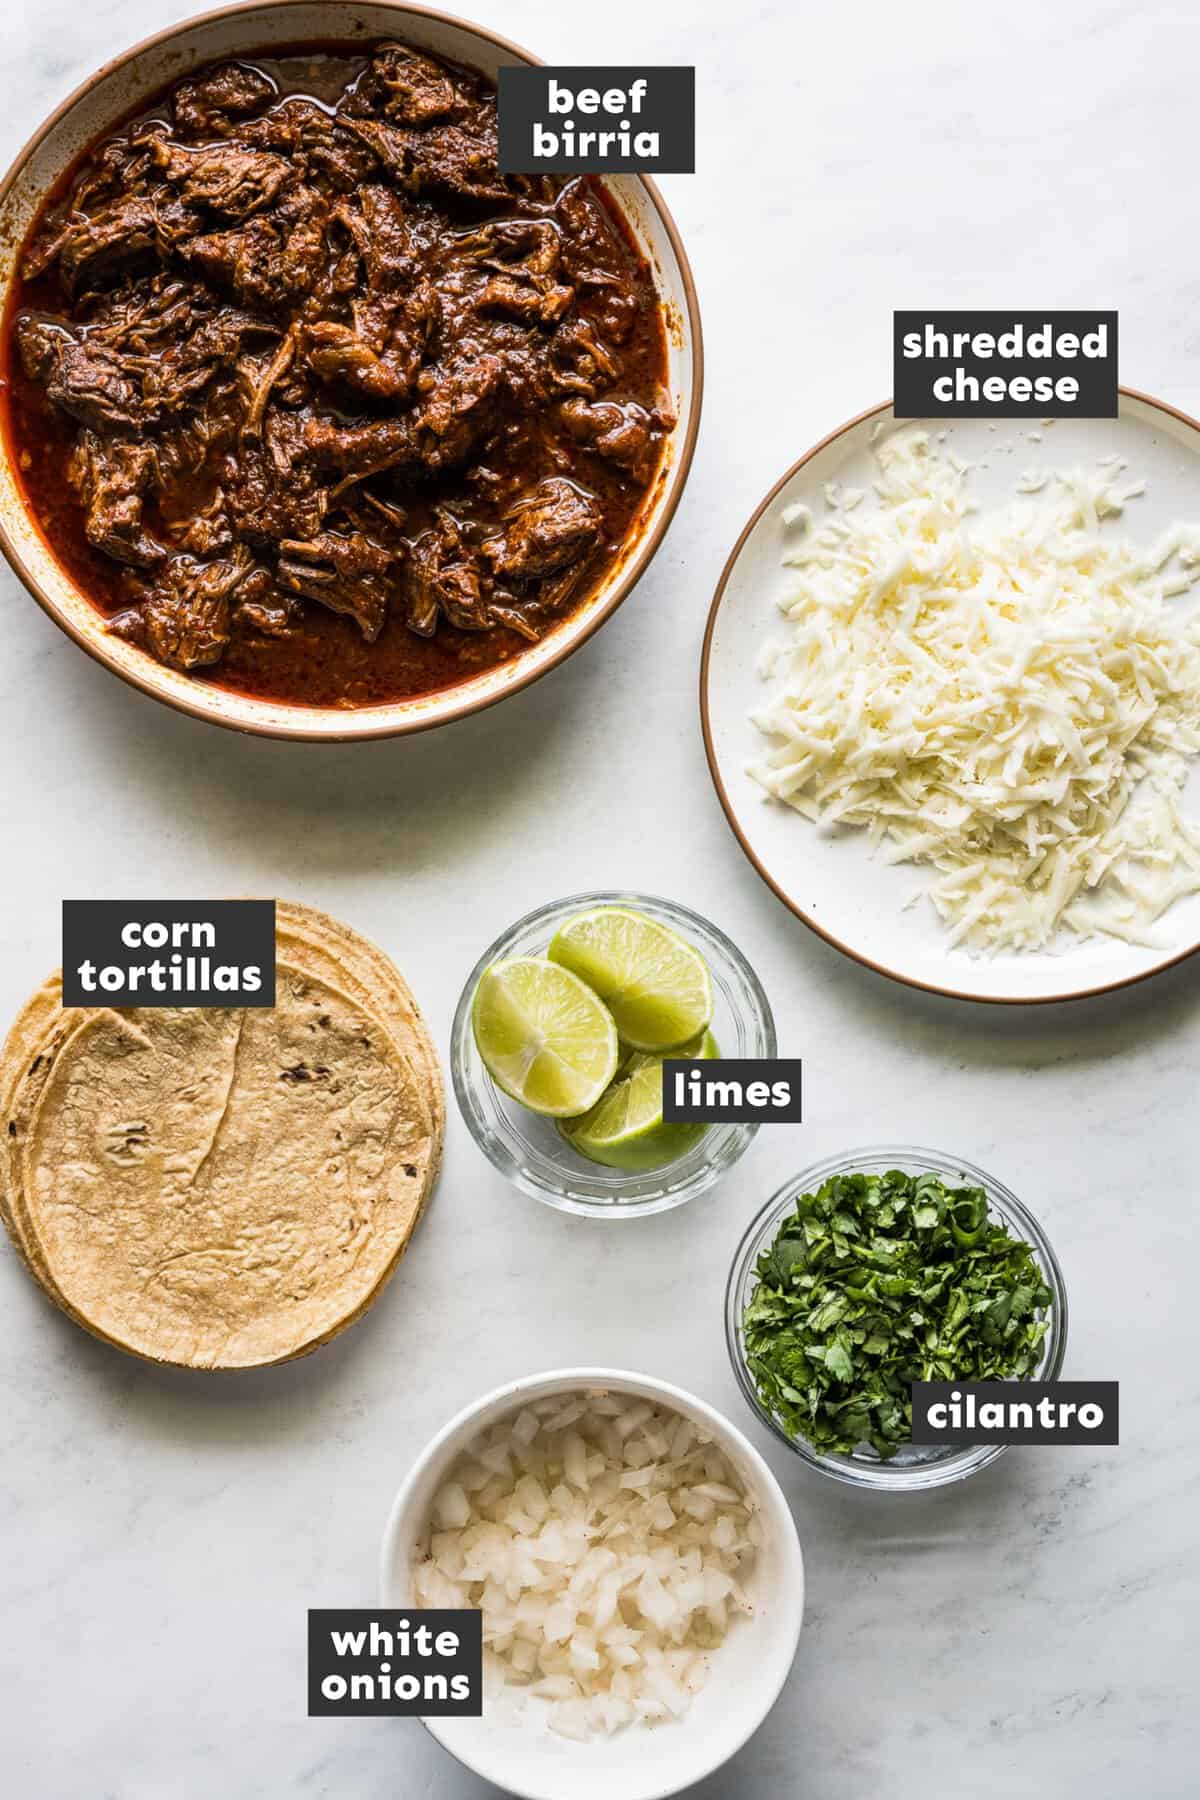 Birria taco ingredients on a table